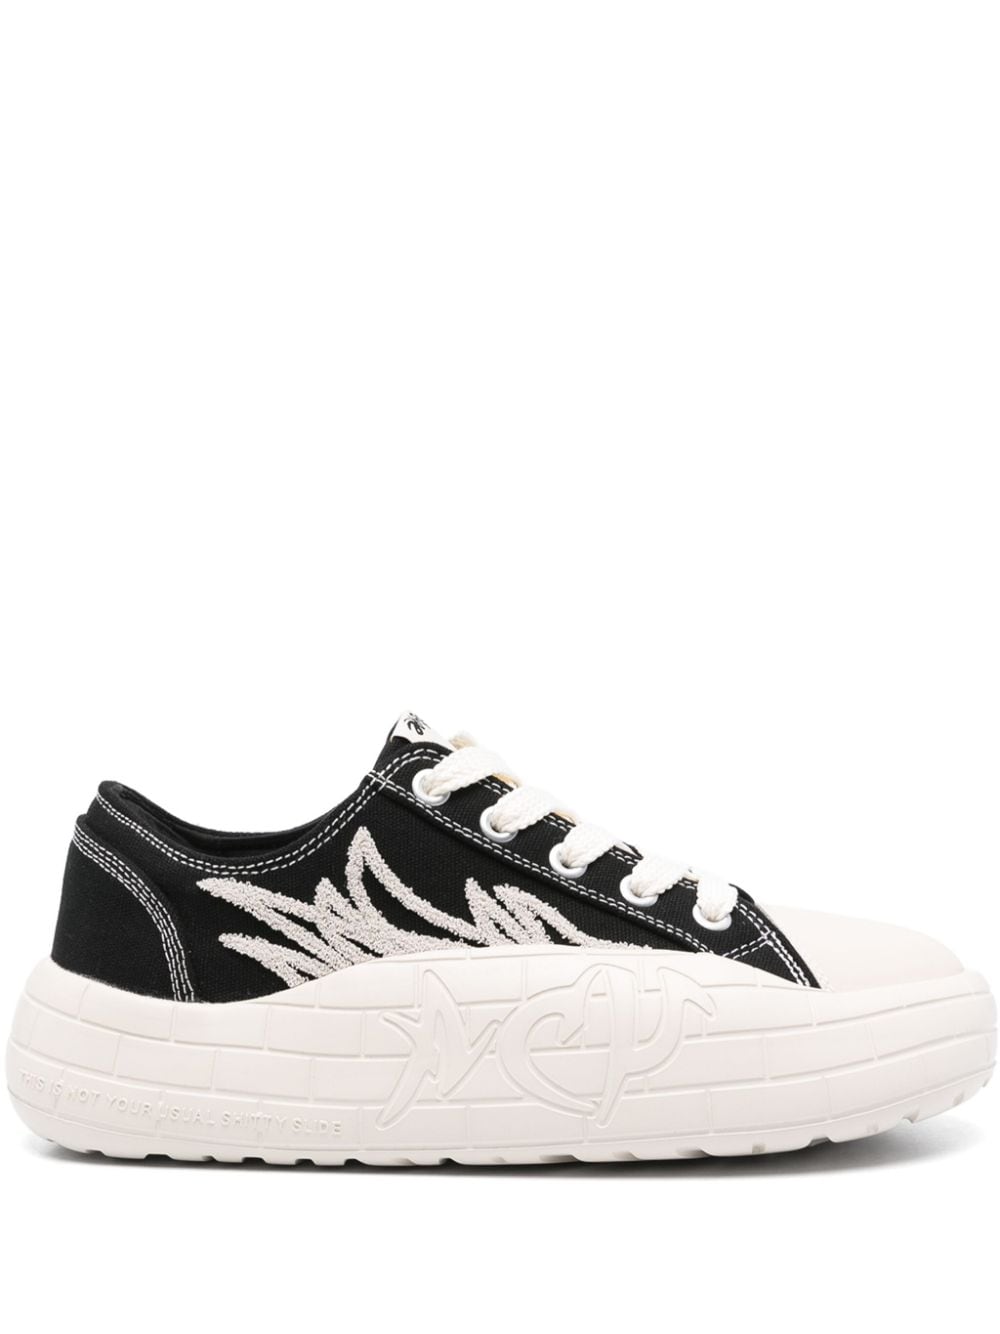 ACUPUNCTURE 1993 contrast-stitching twill sneakers Black